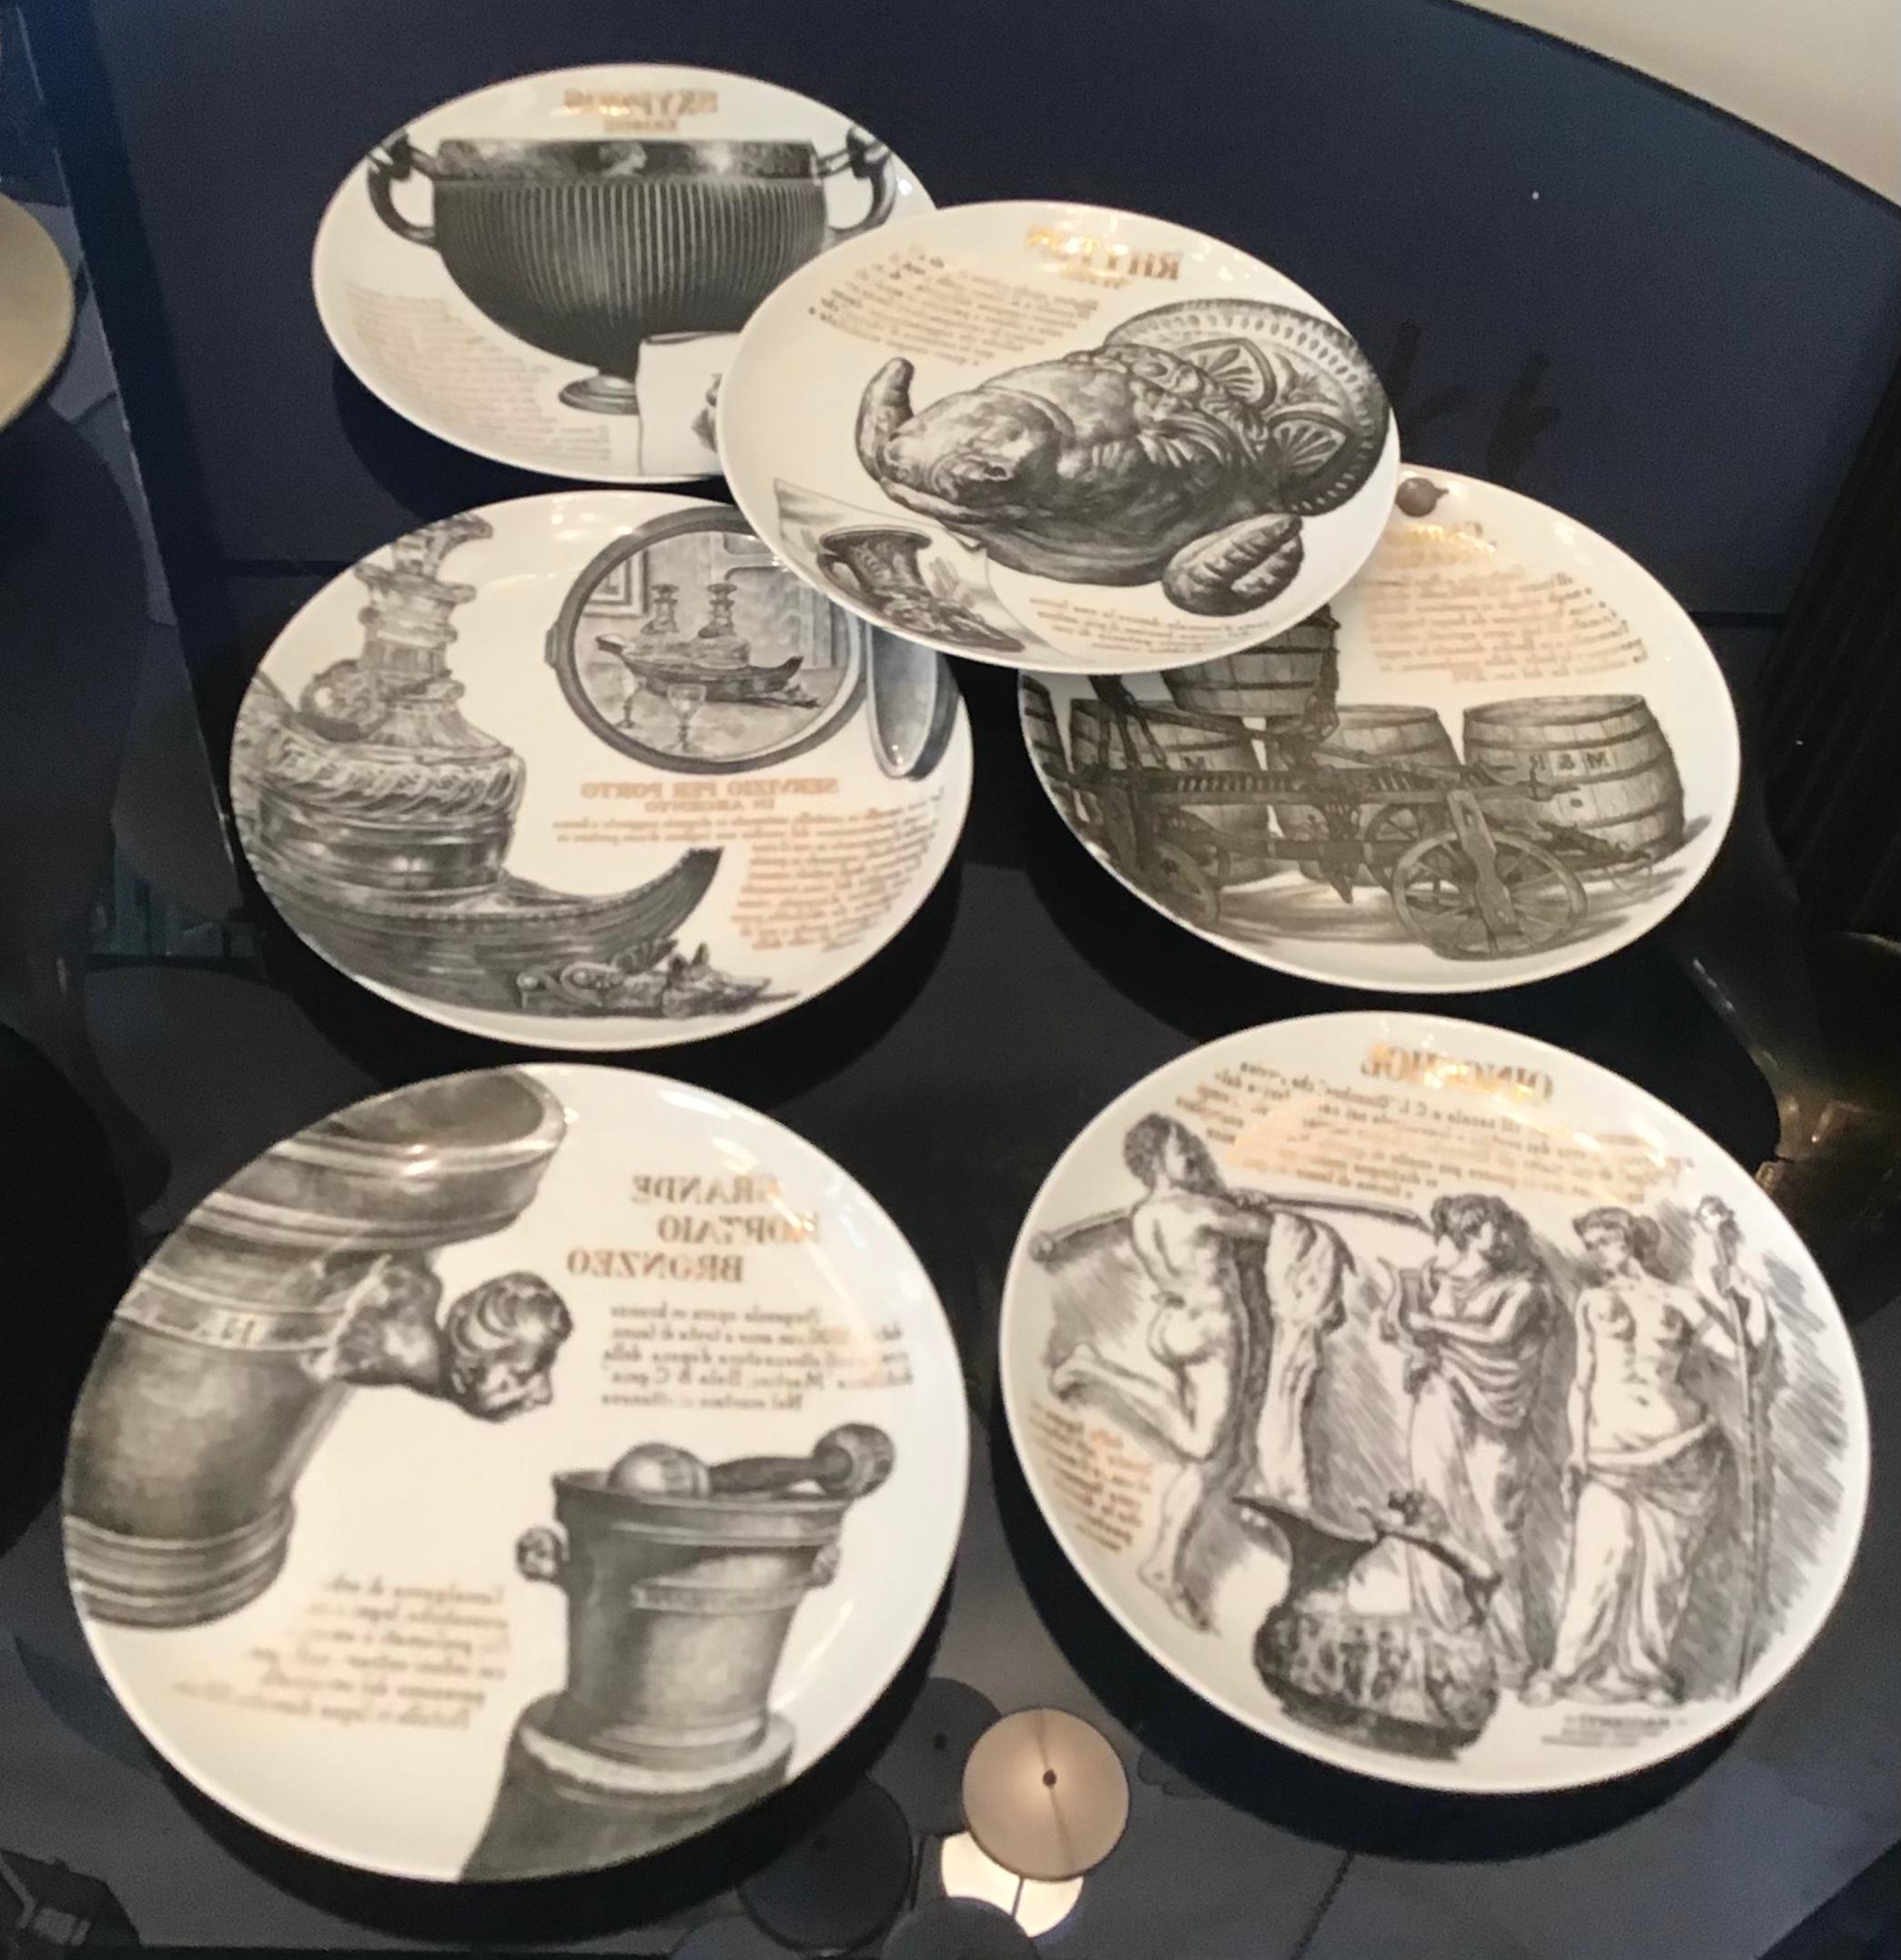 Fornasetti Set of 6 Plates for Martini and Rossi Porcelain, 1970, Italy For Sale 9